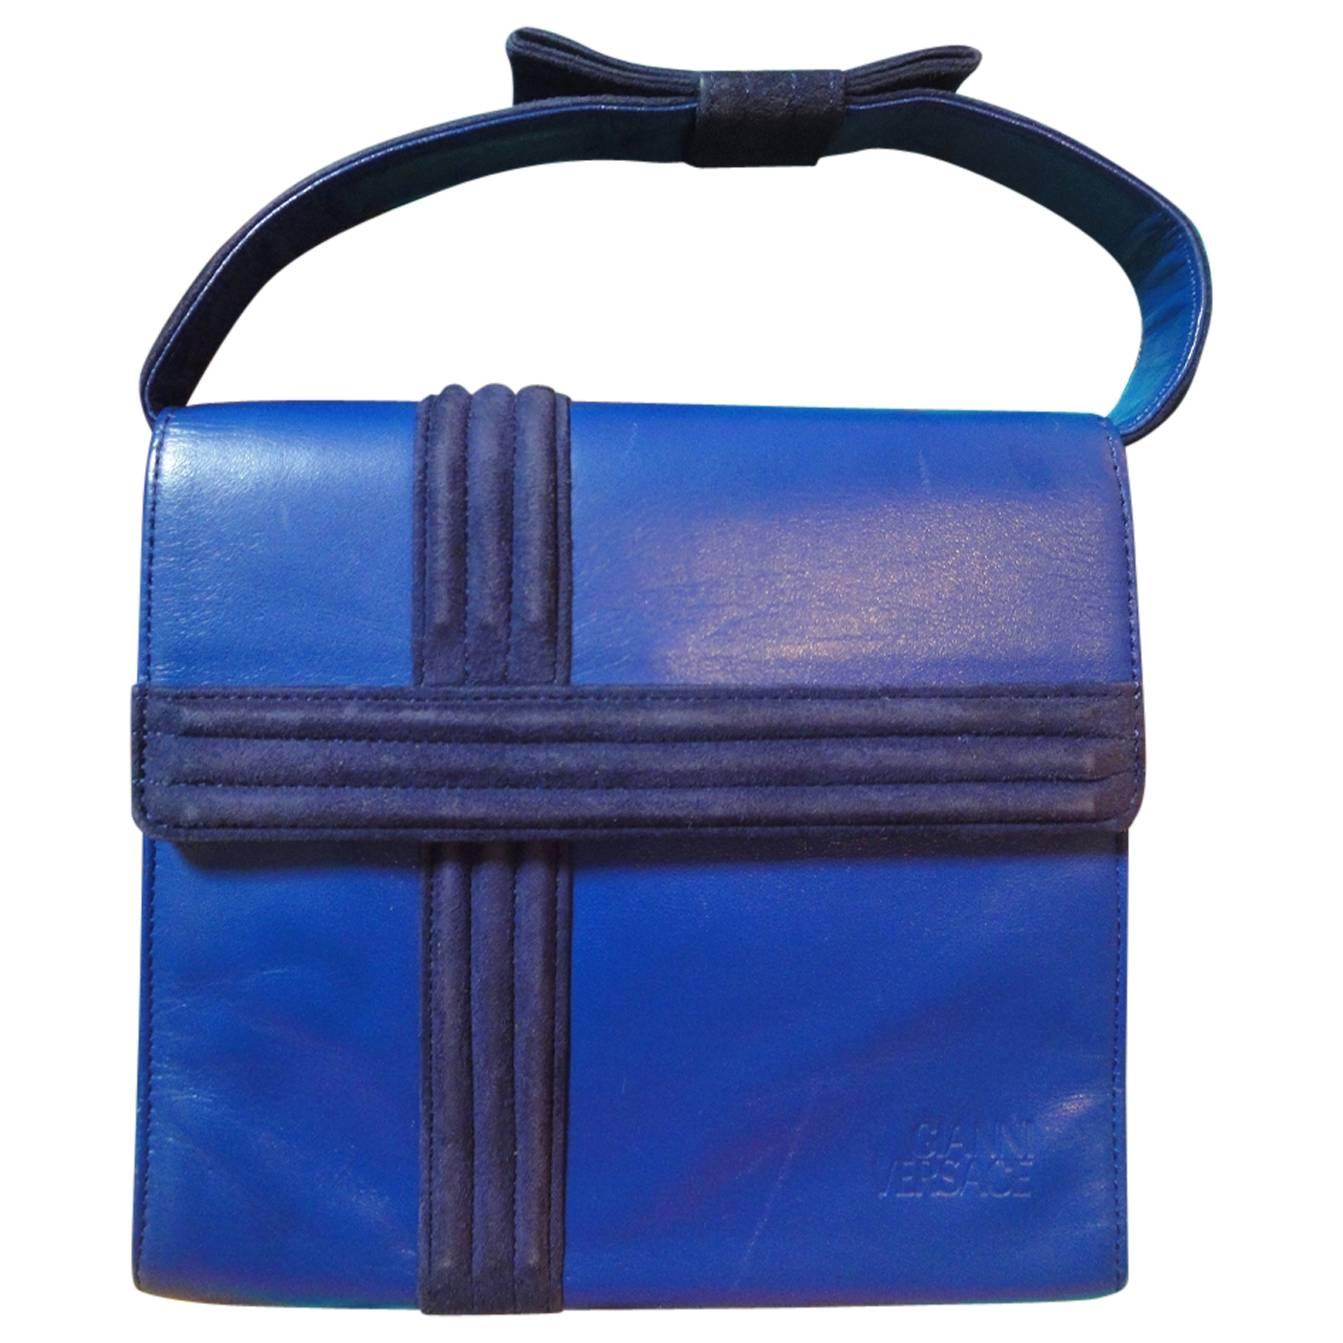 Vintage Gianni Versace blue smooth and suede leather handbag purse with a bow. 